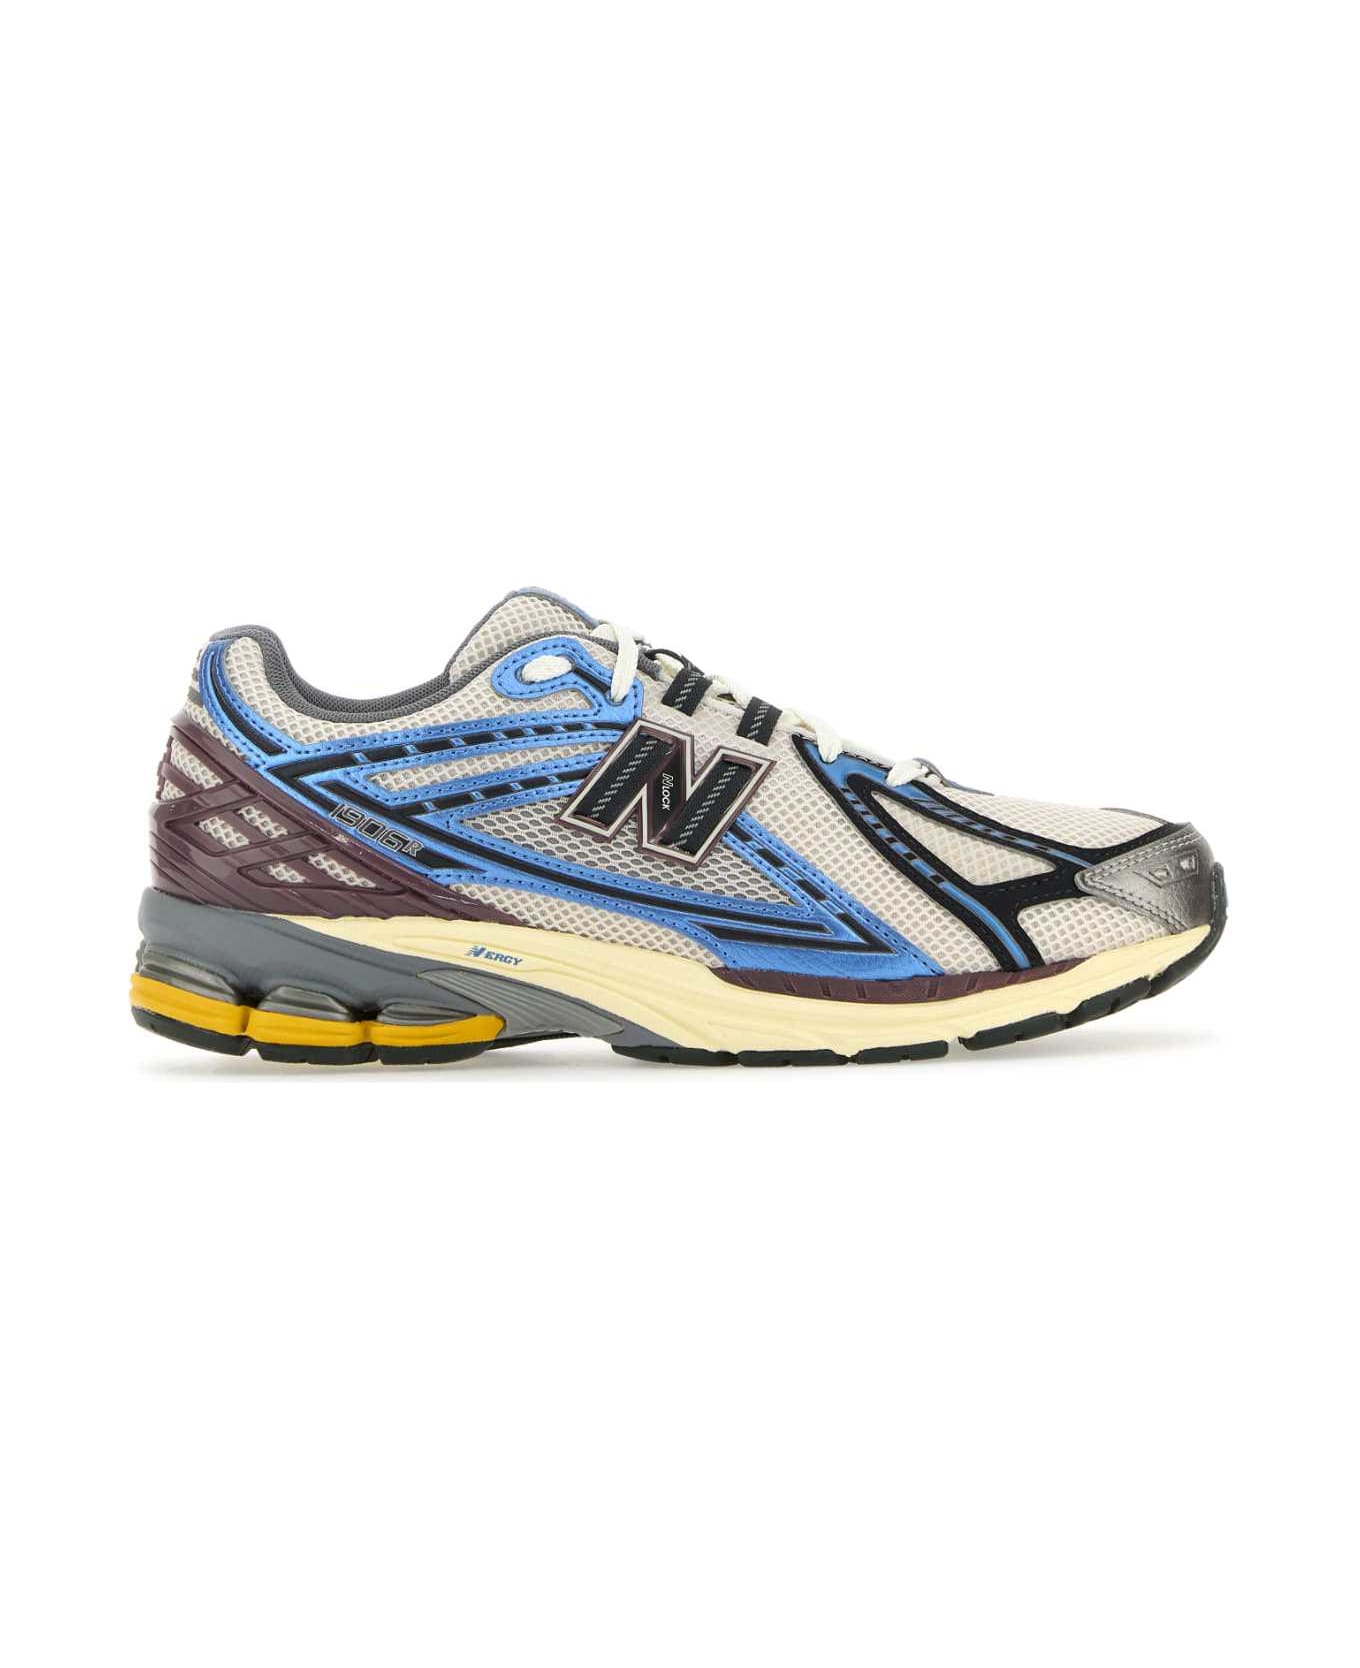 New Balance MultiPink Rubber And Mesh 1906r Sneakers - BLUE